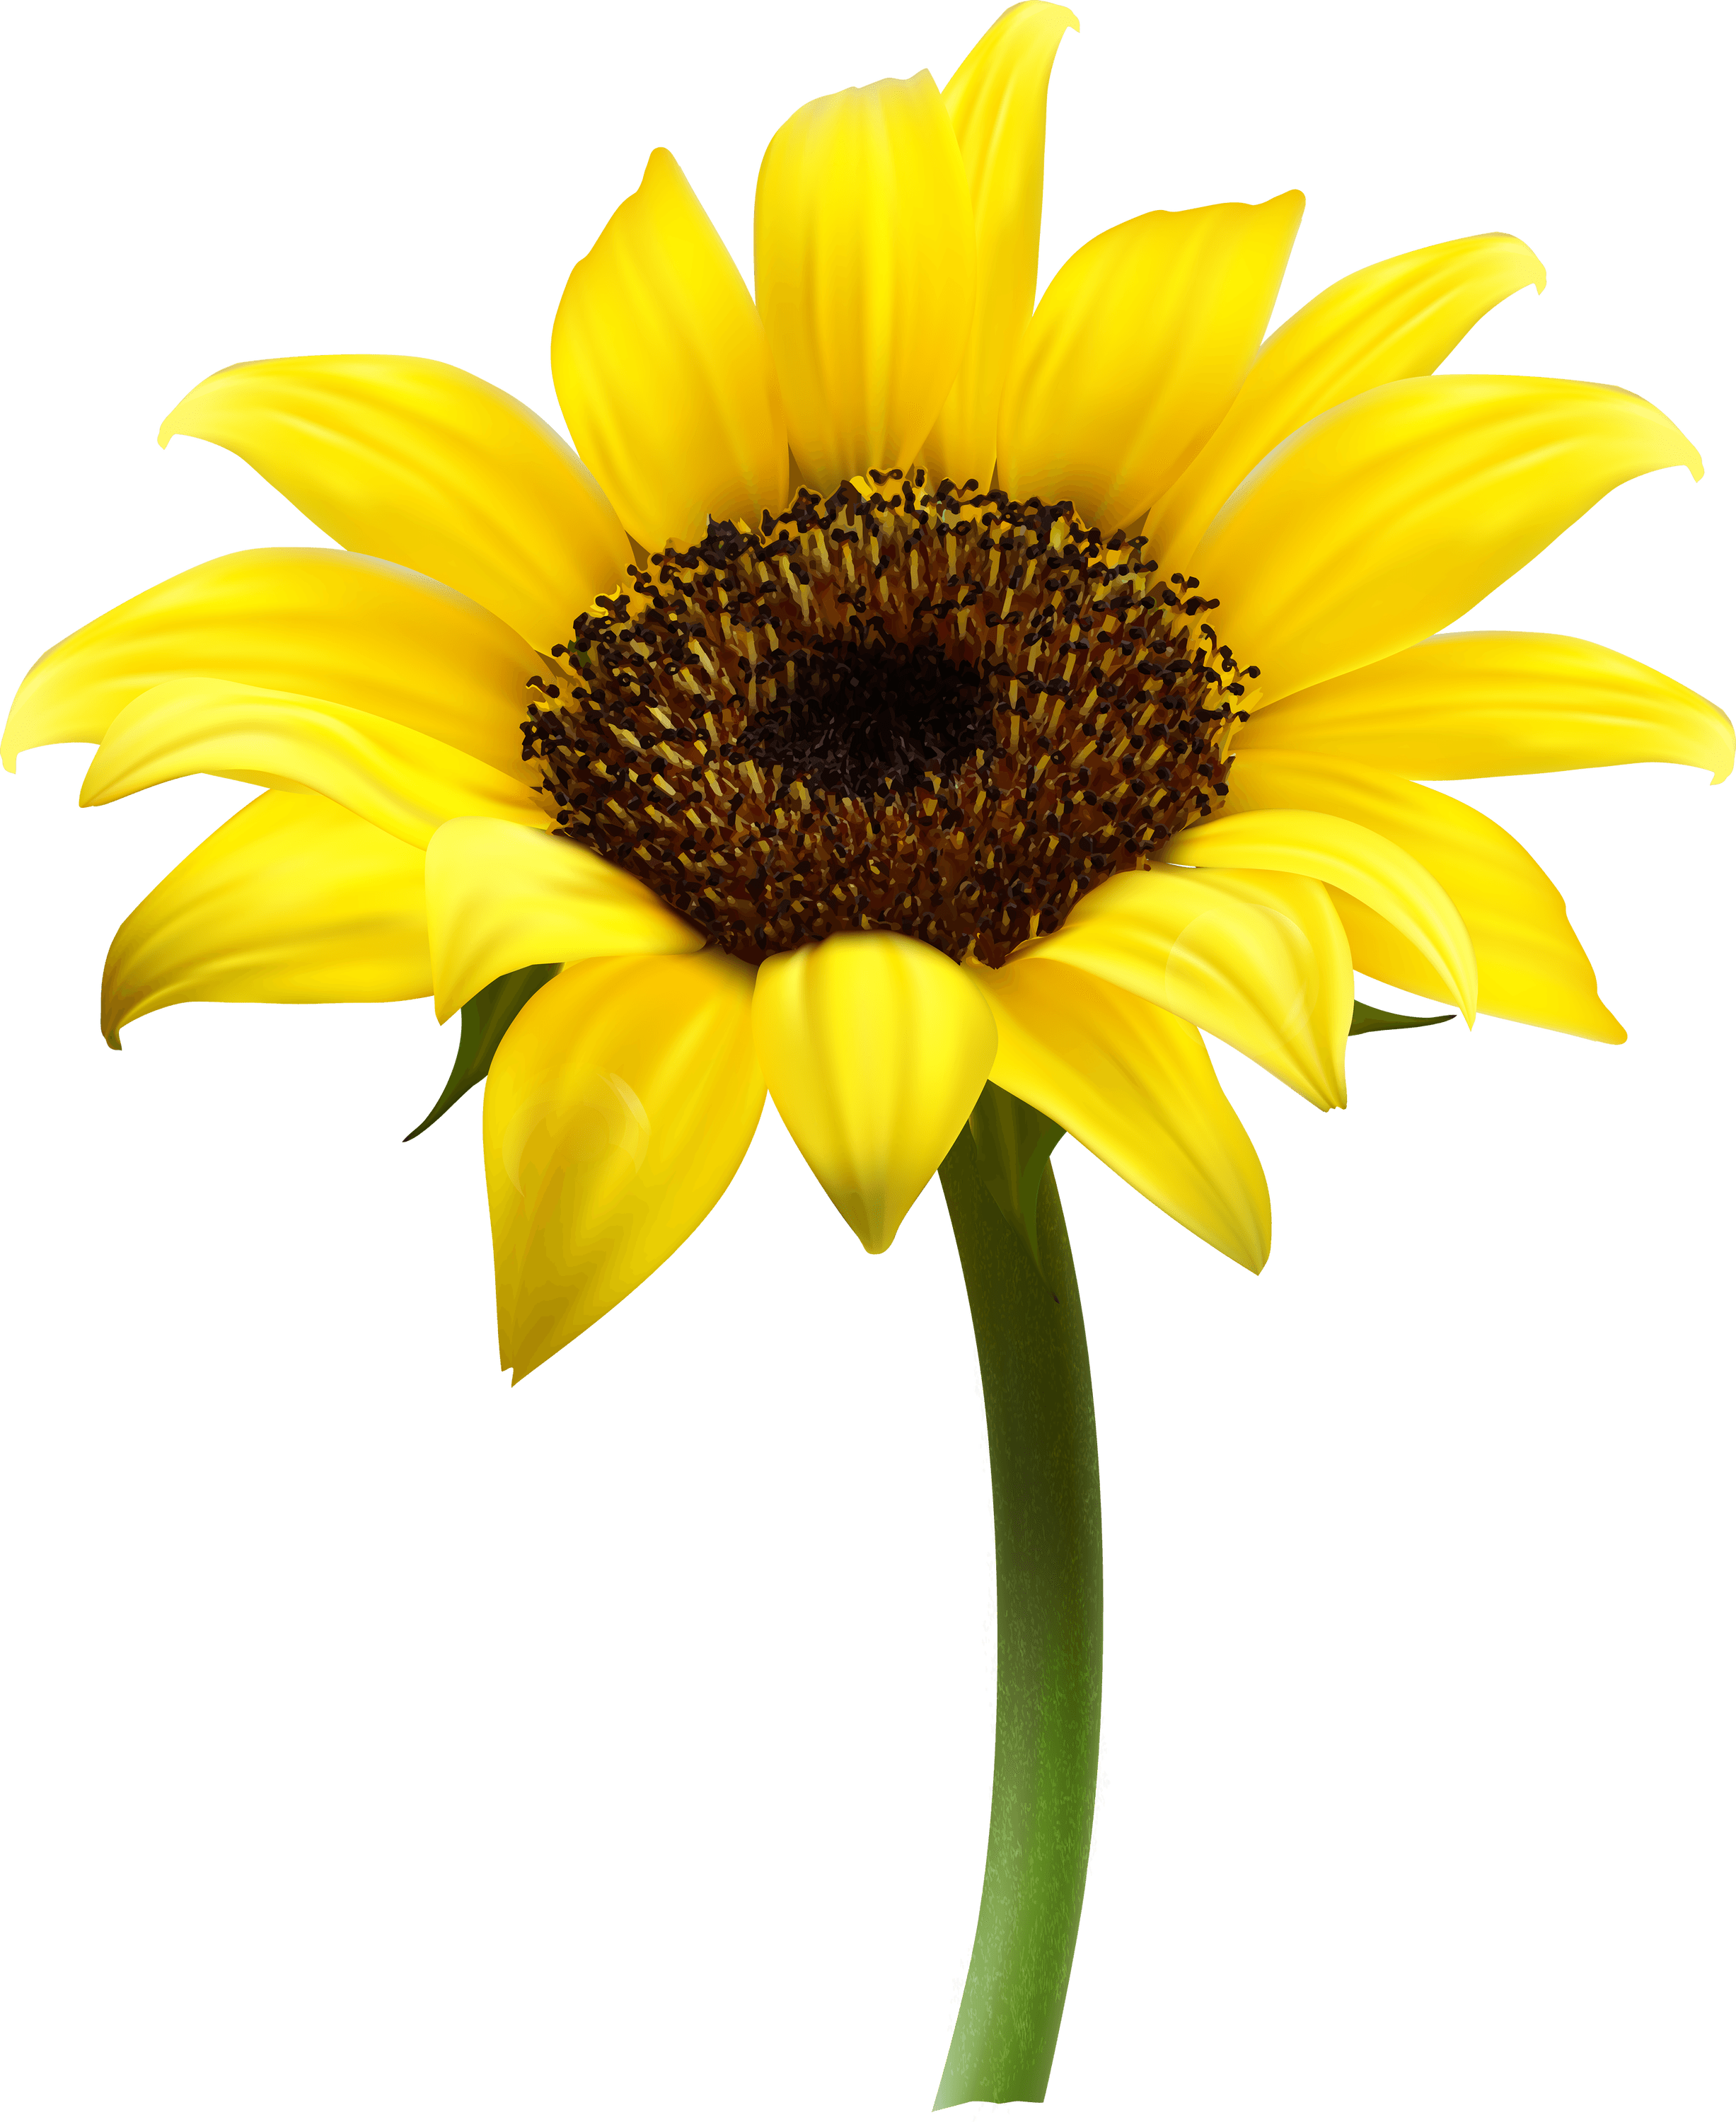 Aesthetic Sunflower Free PNG Image